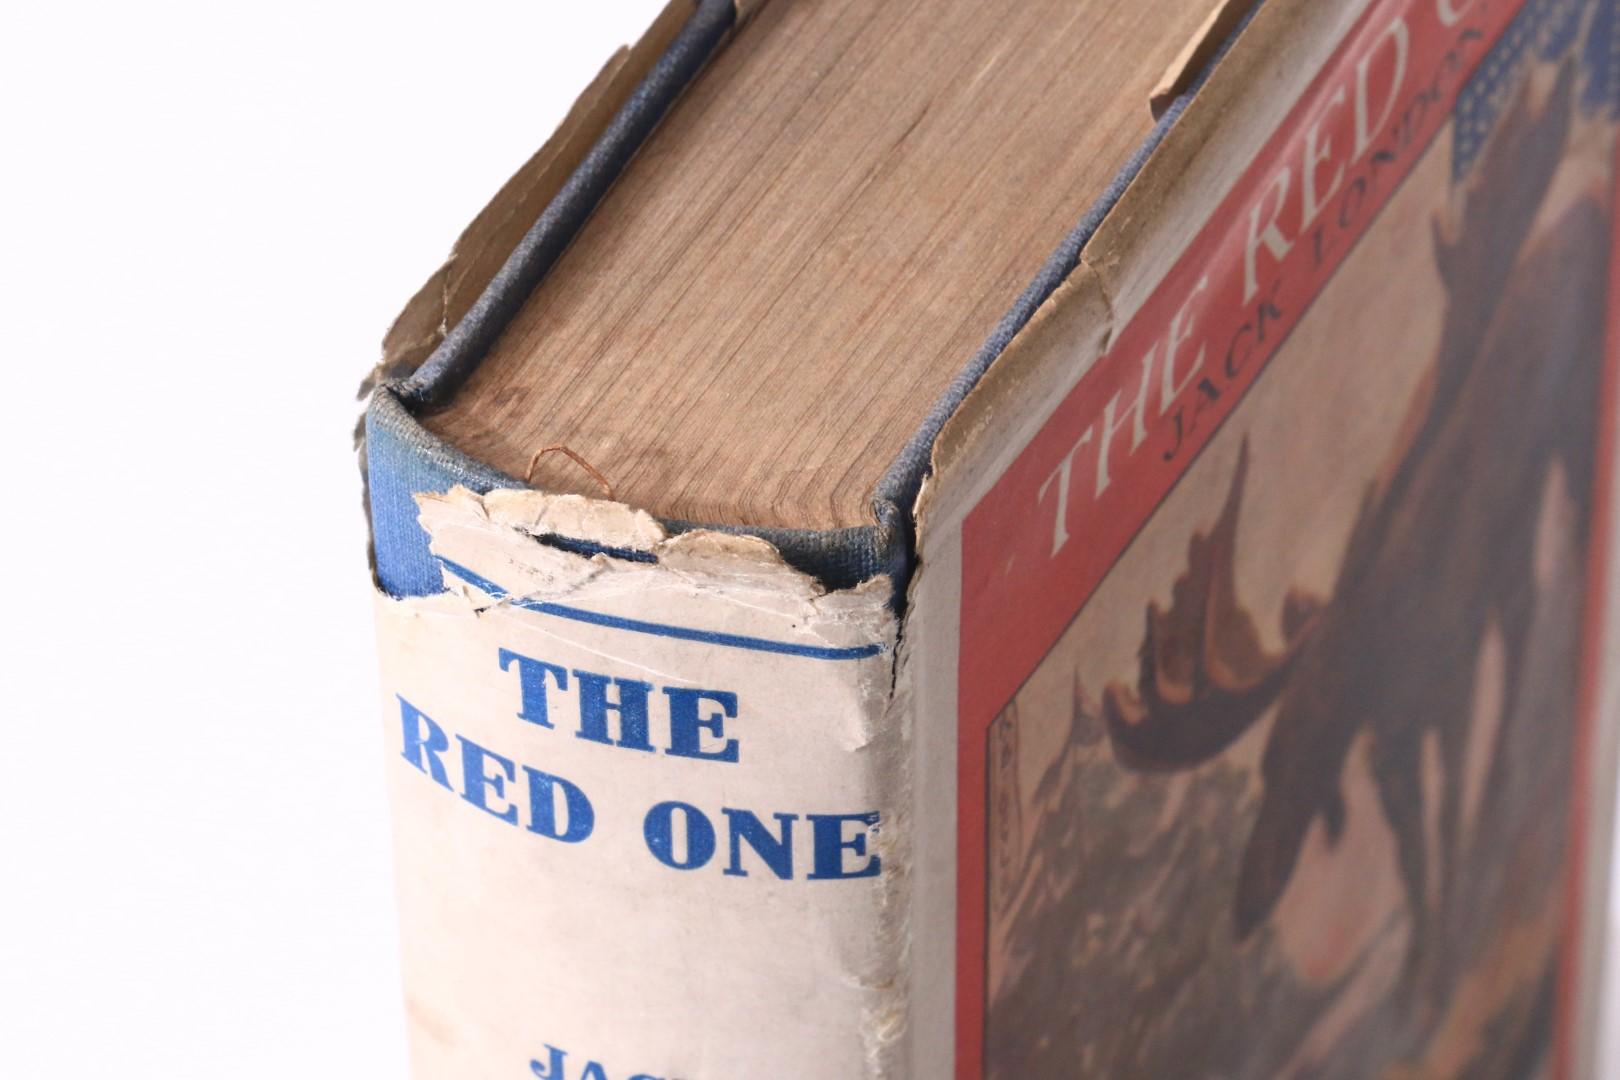 Jack London - The Red One - Mills & Boon, 1919, First Edition.